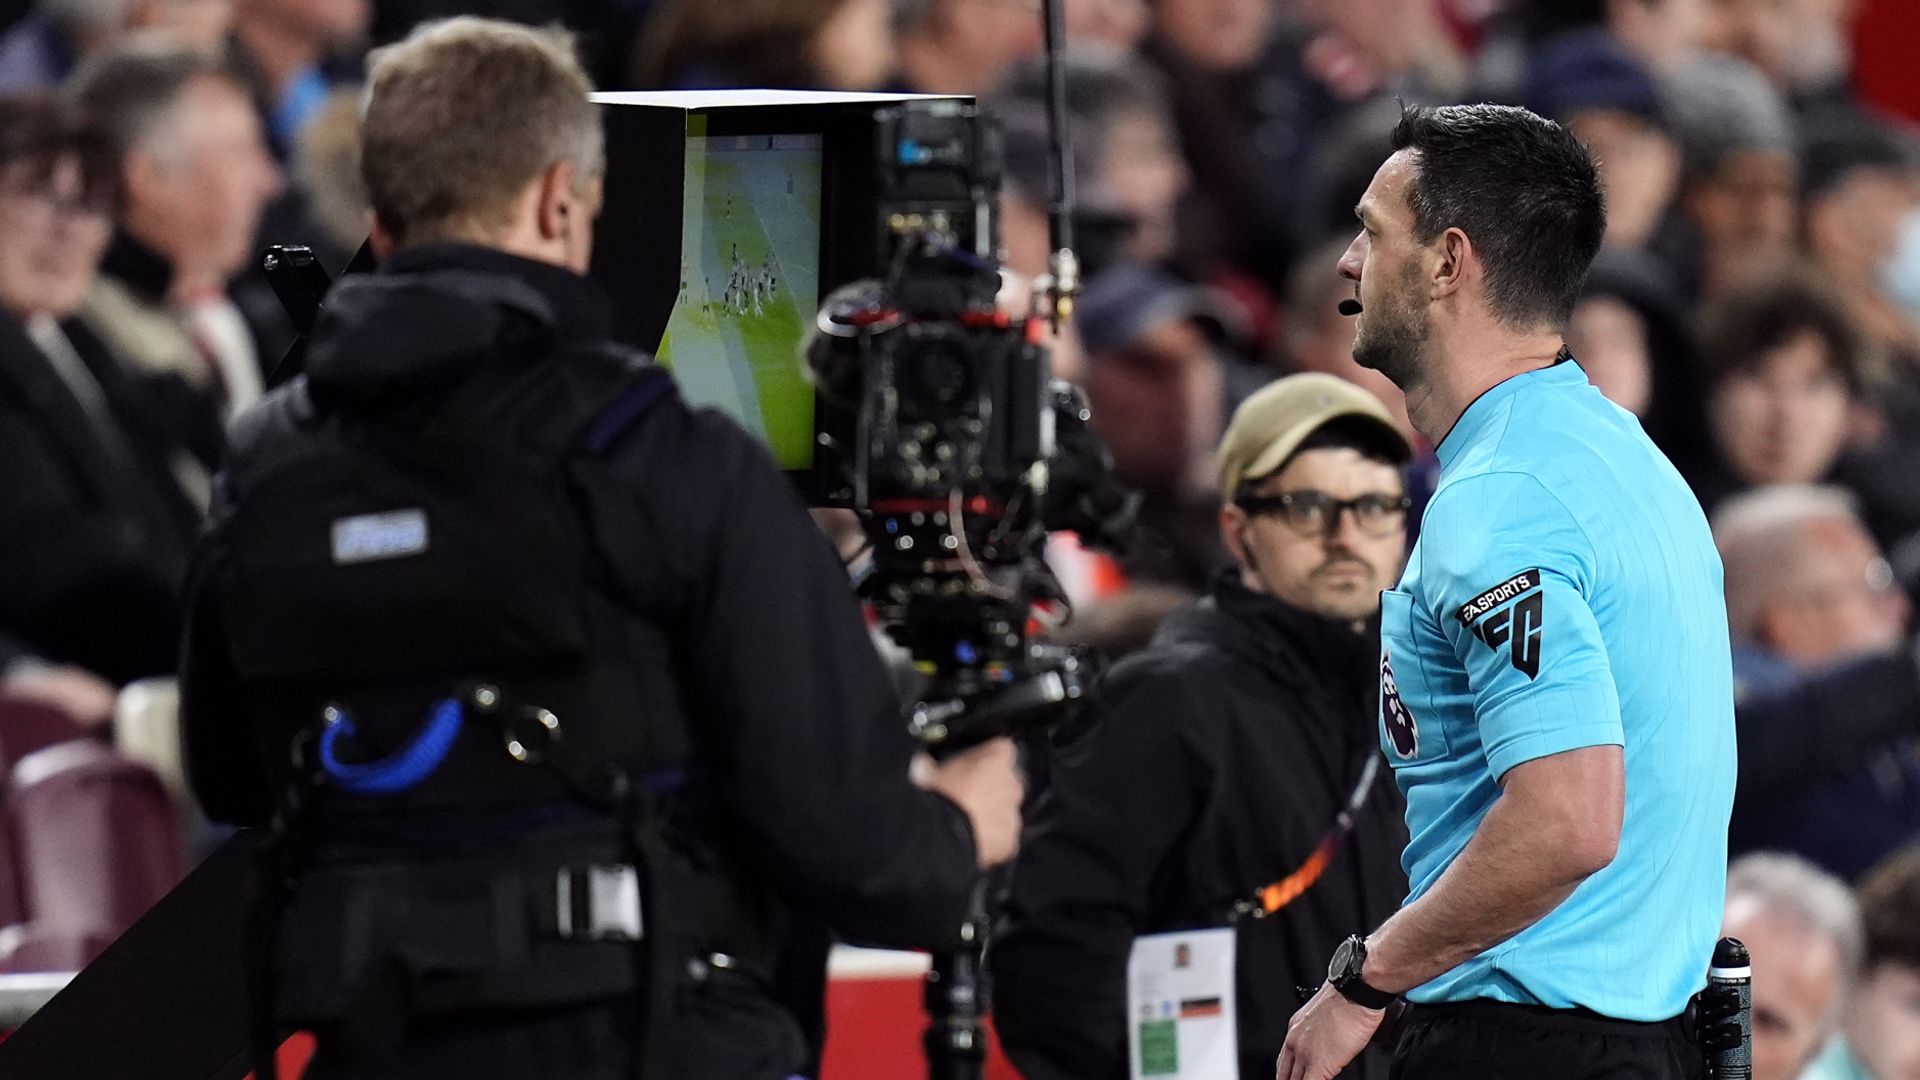 PL clubs vote to keep VAR - Wolves alone in calling for it to be scrapped